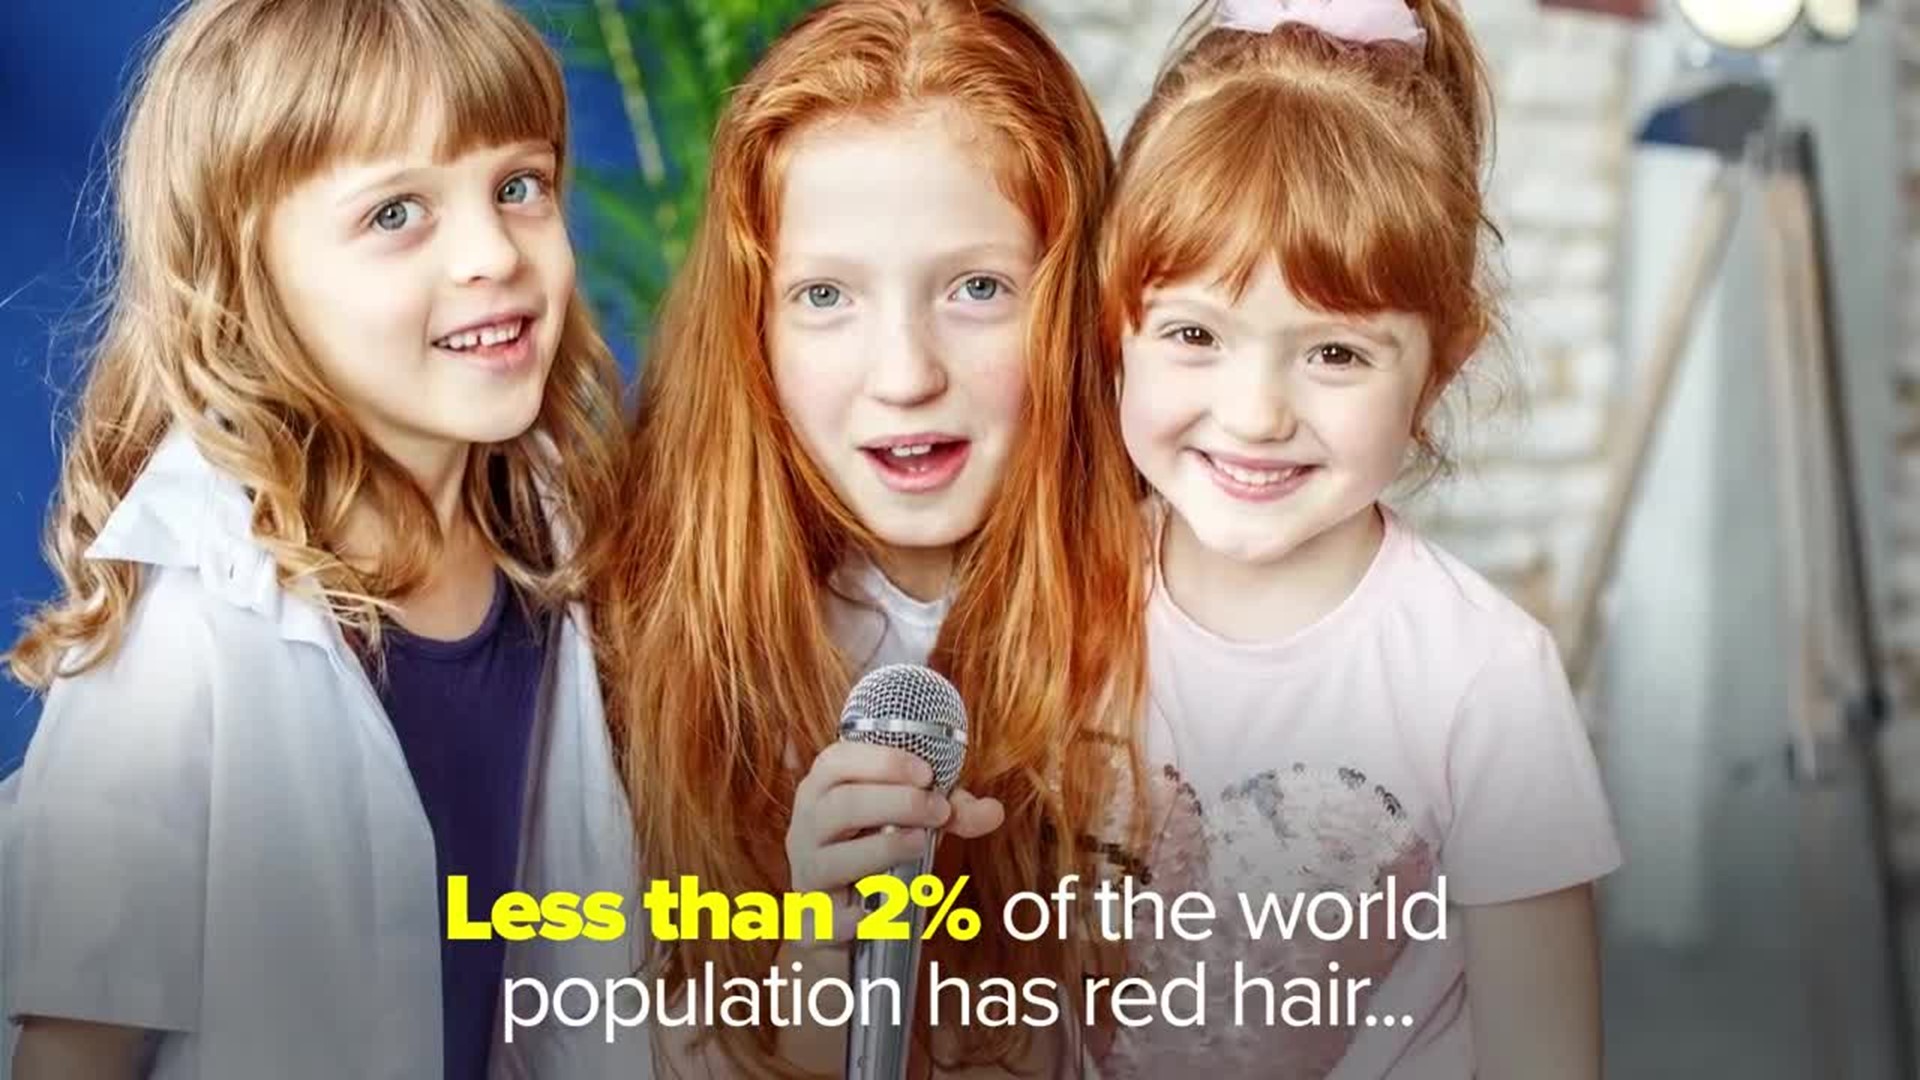 St fjols Amerika Love Your Red Hair Day is on November 5! Here are 12 fun facts about red  hair | localmemphis.com